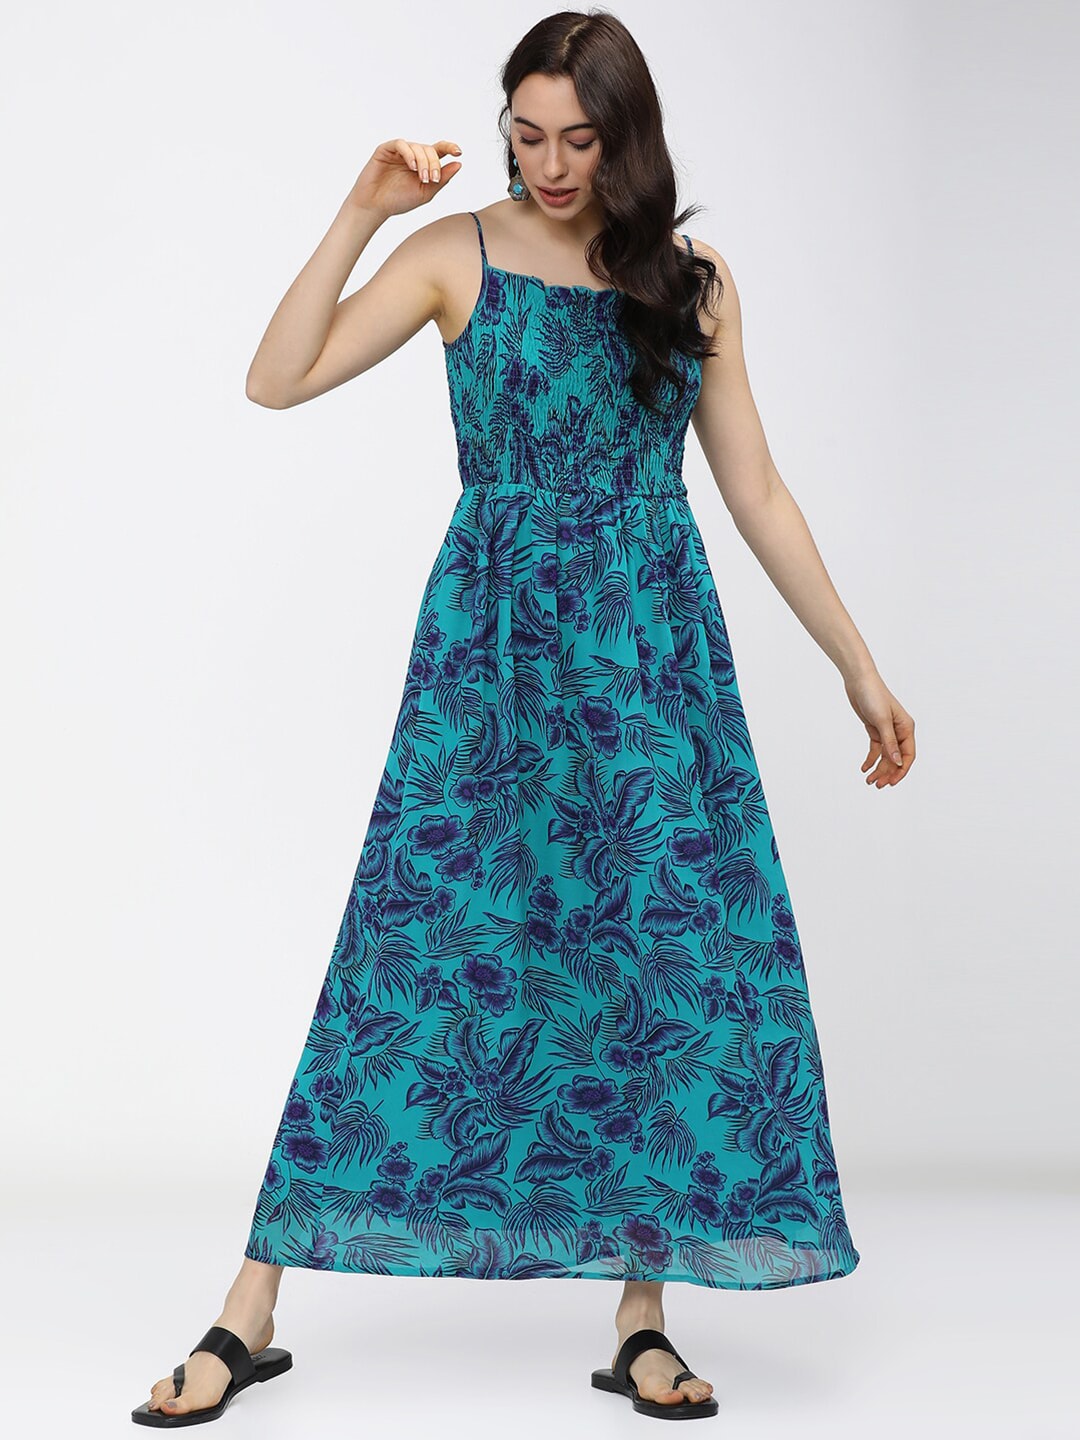 Tokyo Talkies Turquoise Blue Floral Maxi Dress Price in India